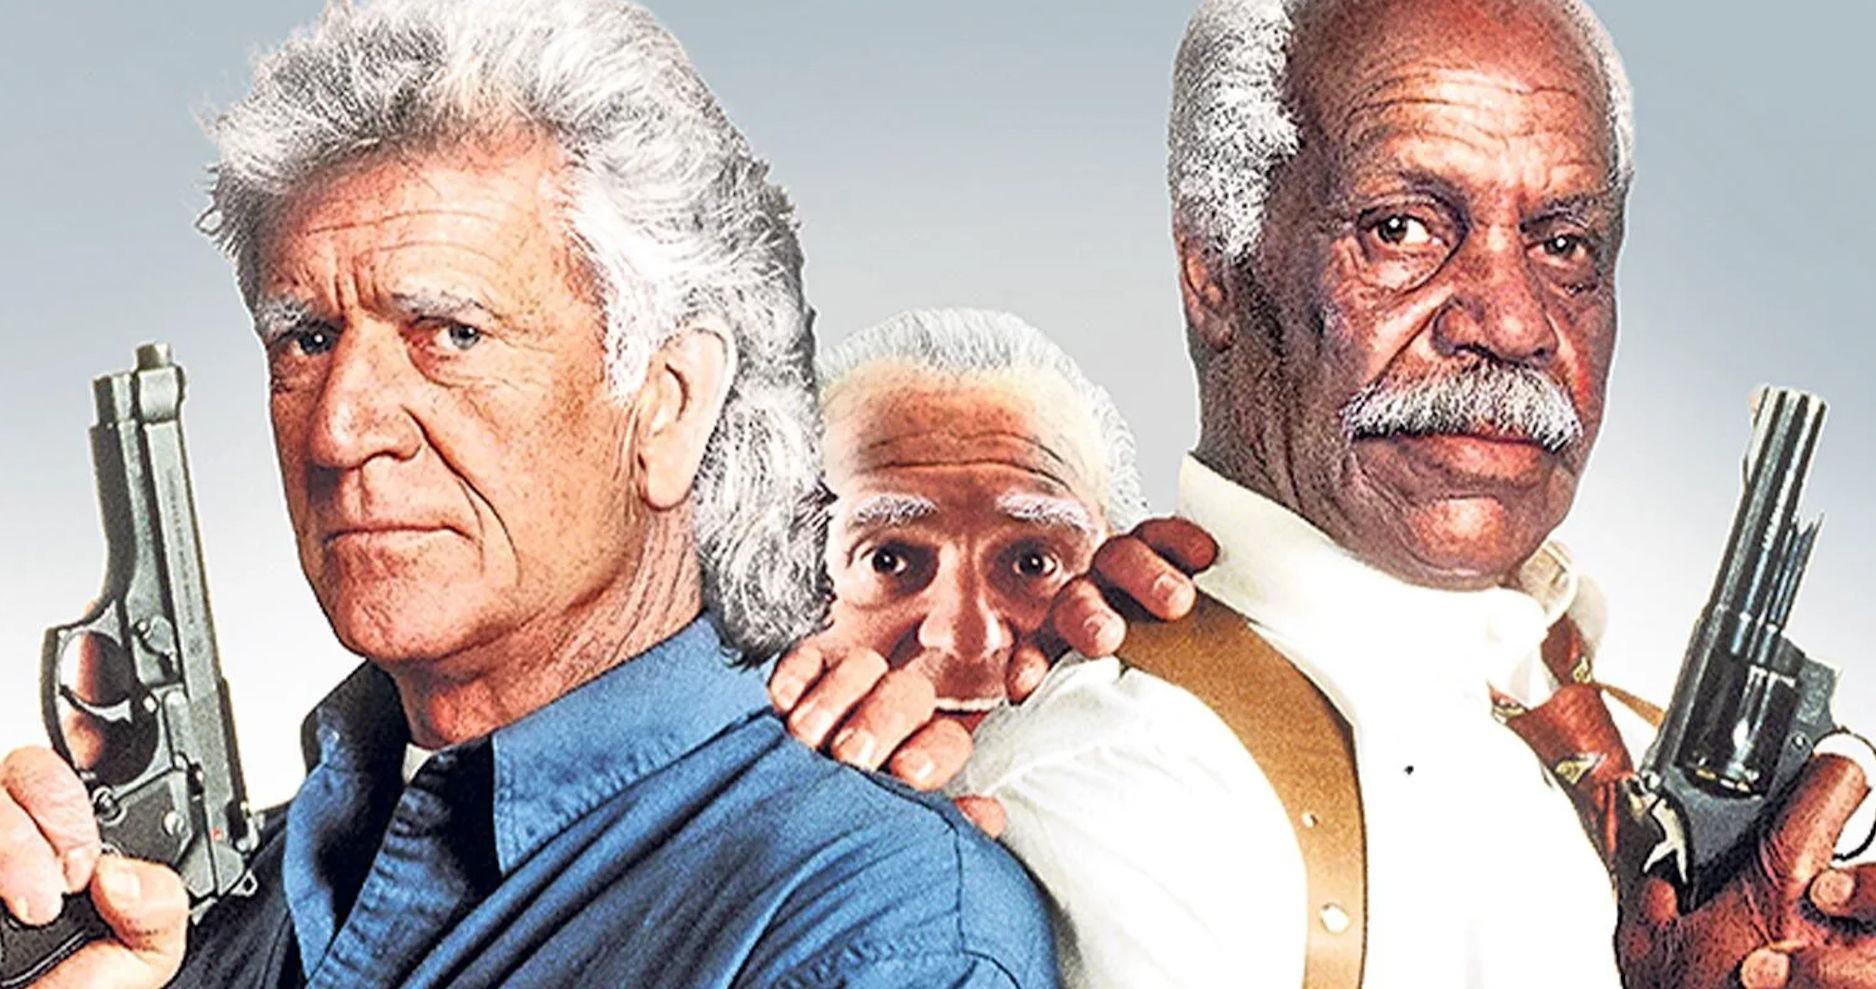 Lethal Weapon 5 Is Expected to Go Straight to Streaming on HBO Max